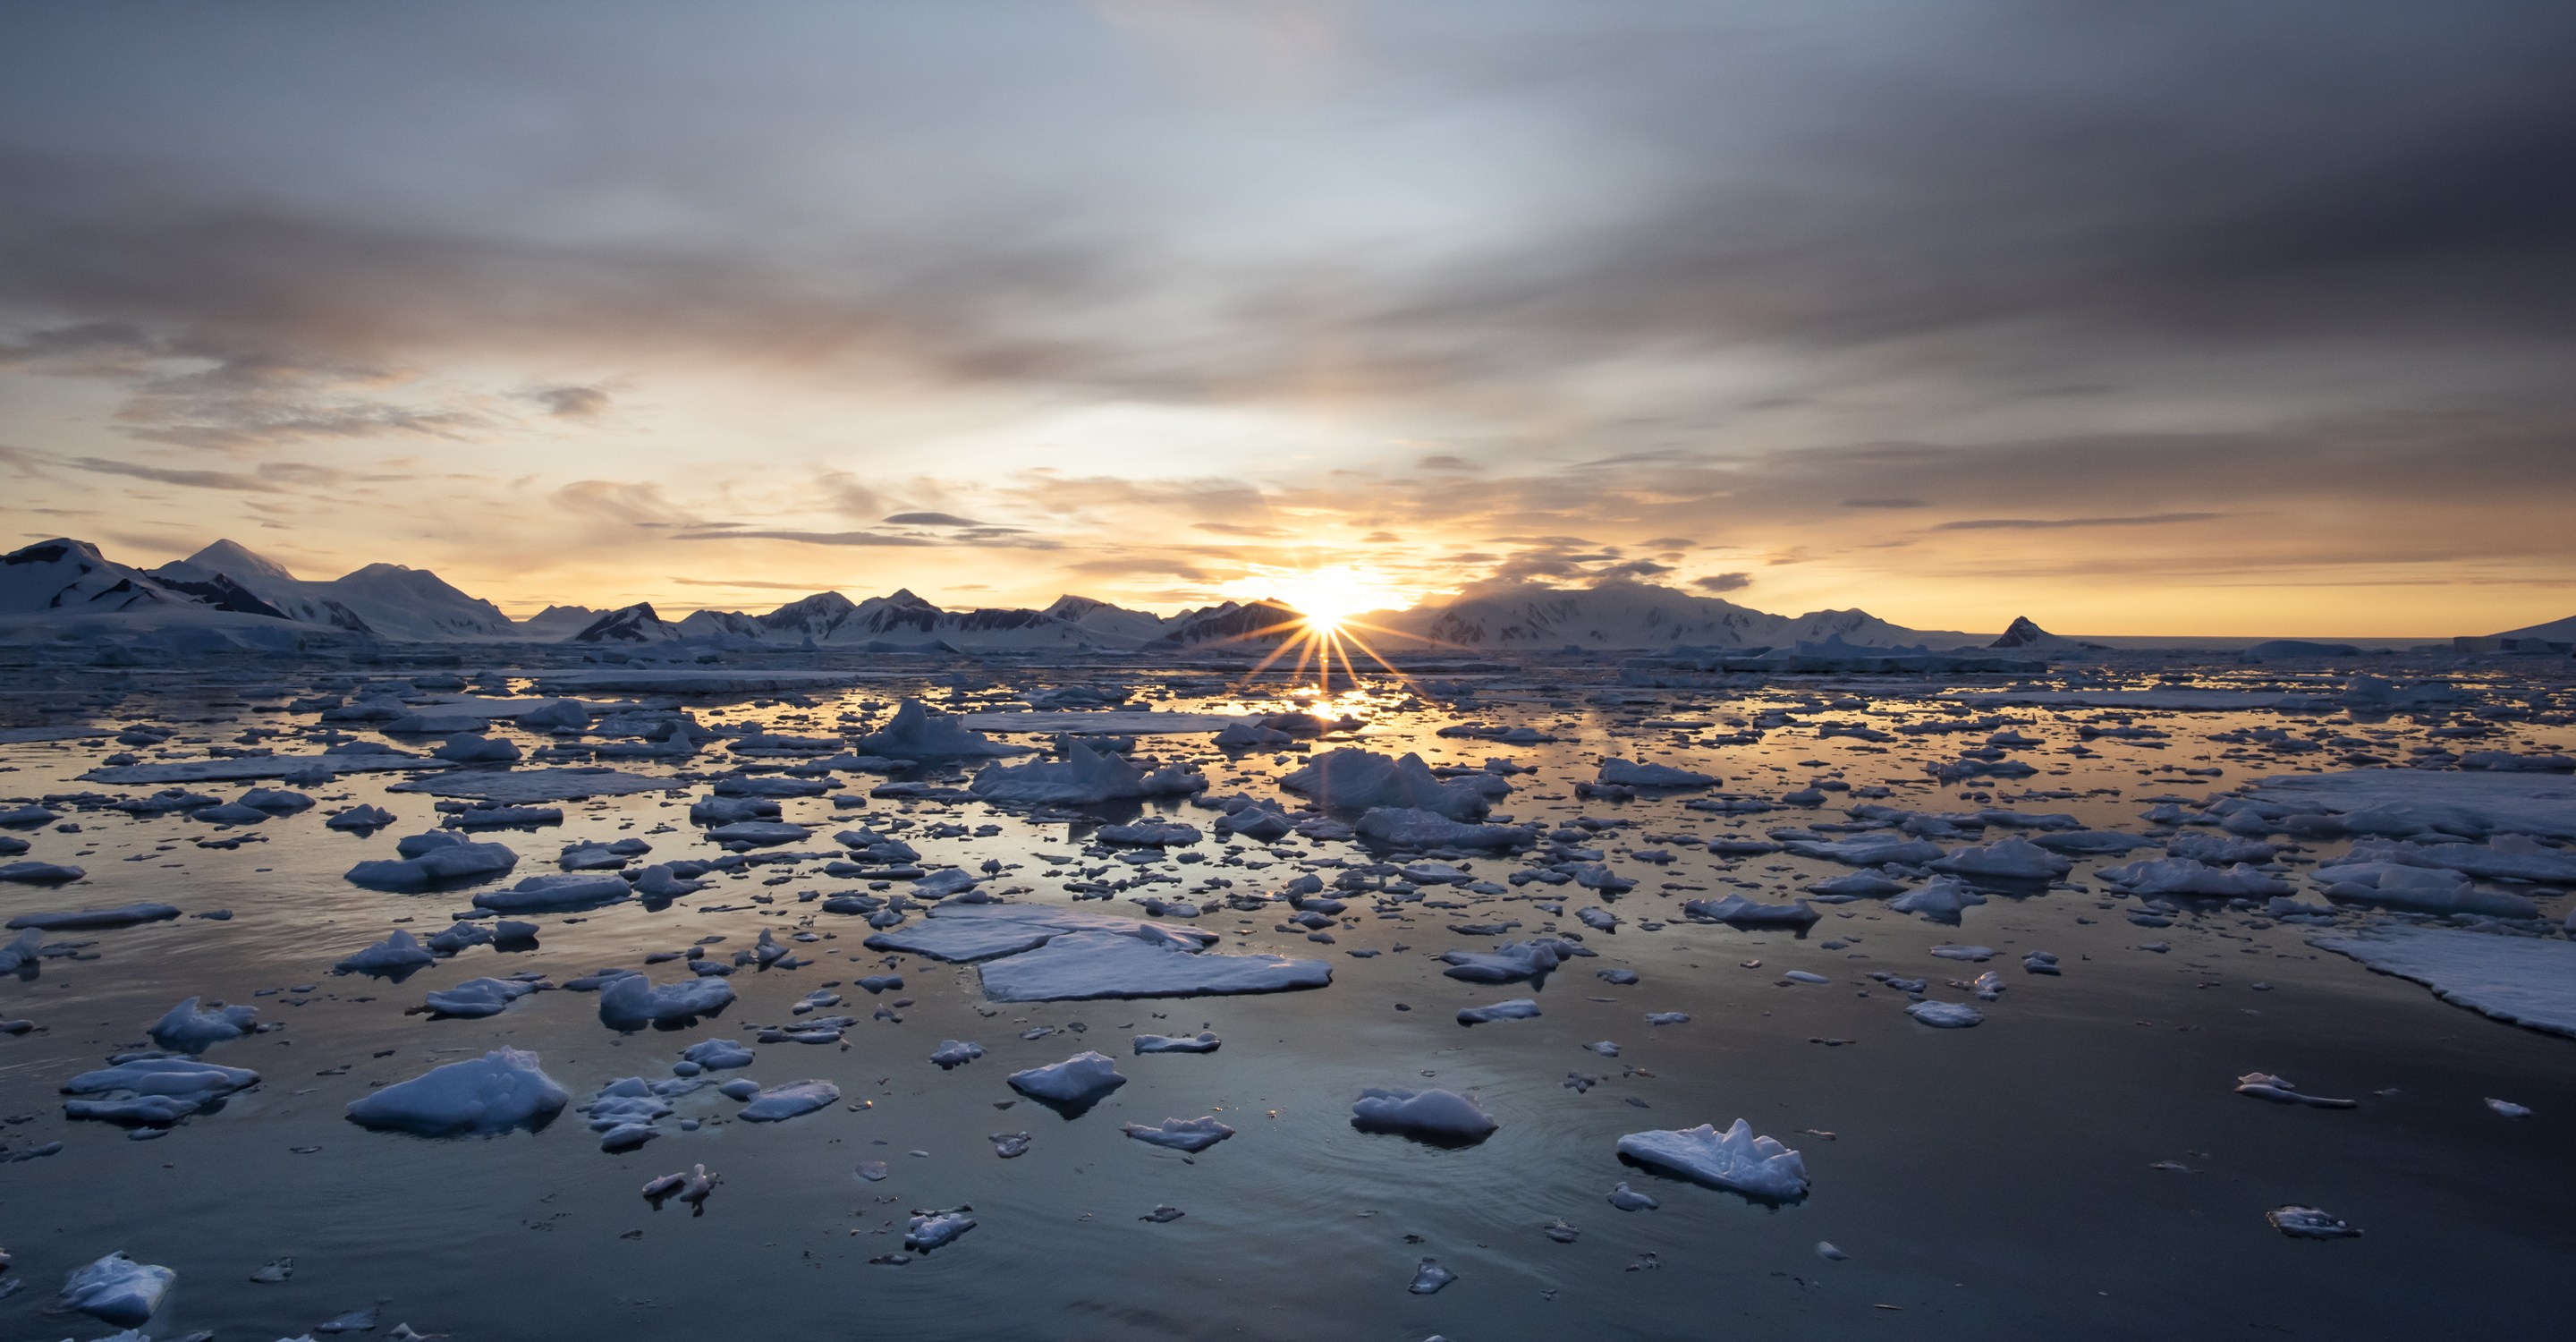 Sunset over the icy waters of Antarctica